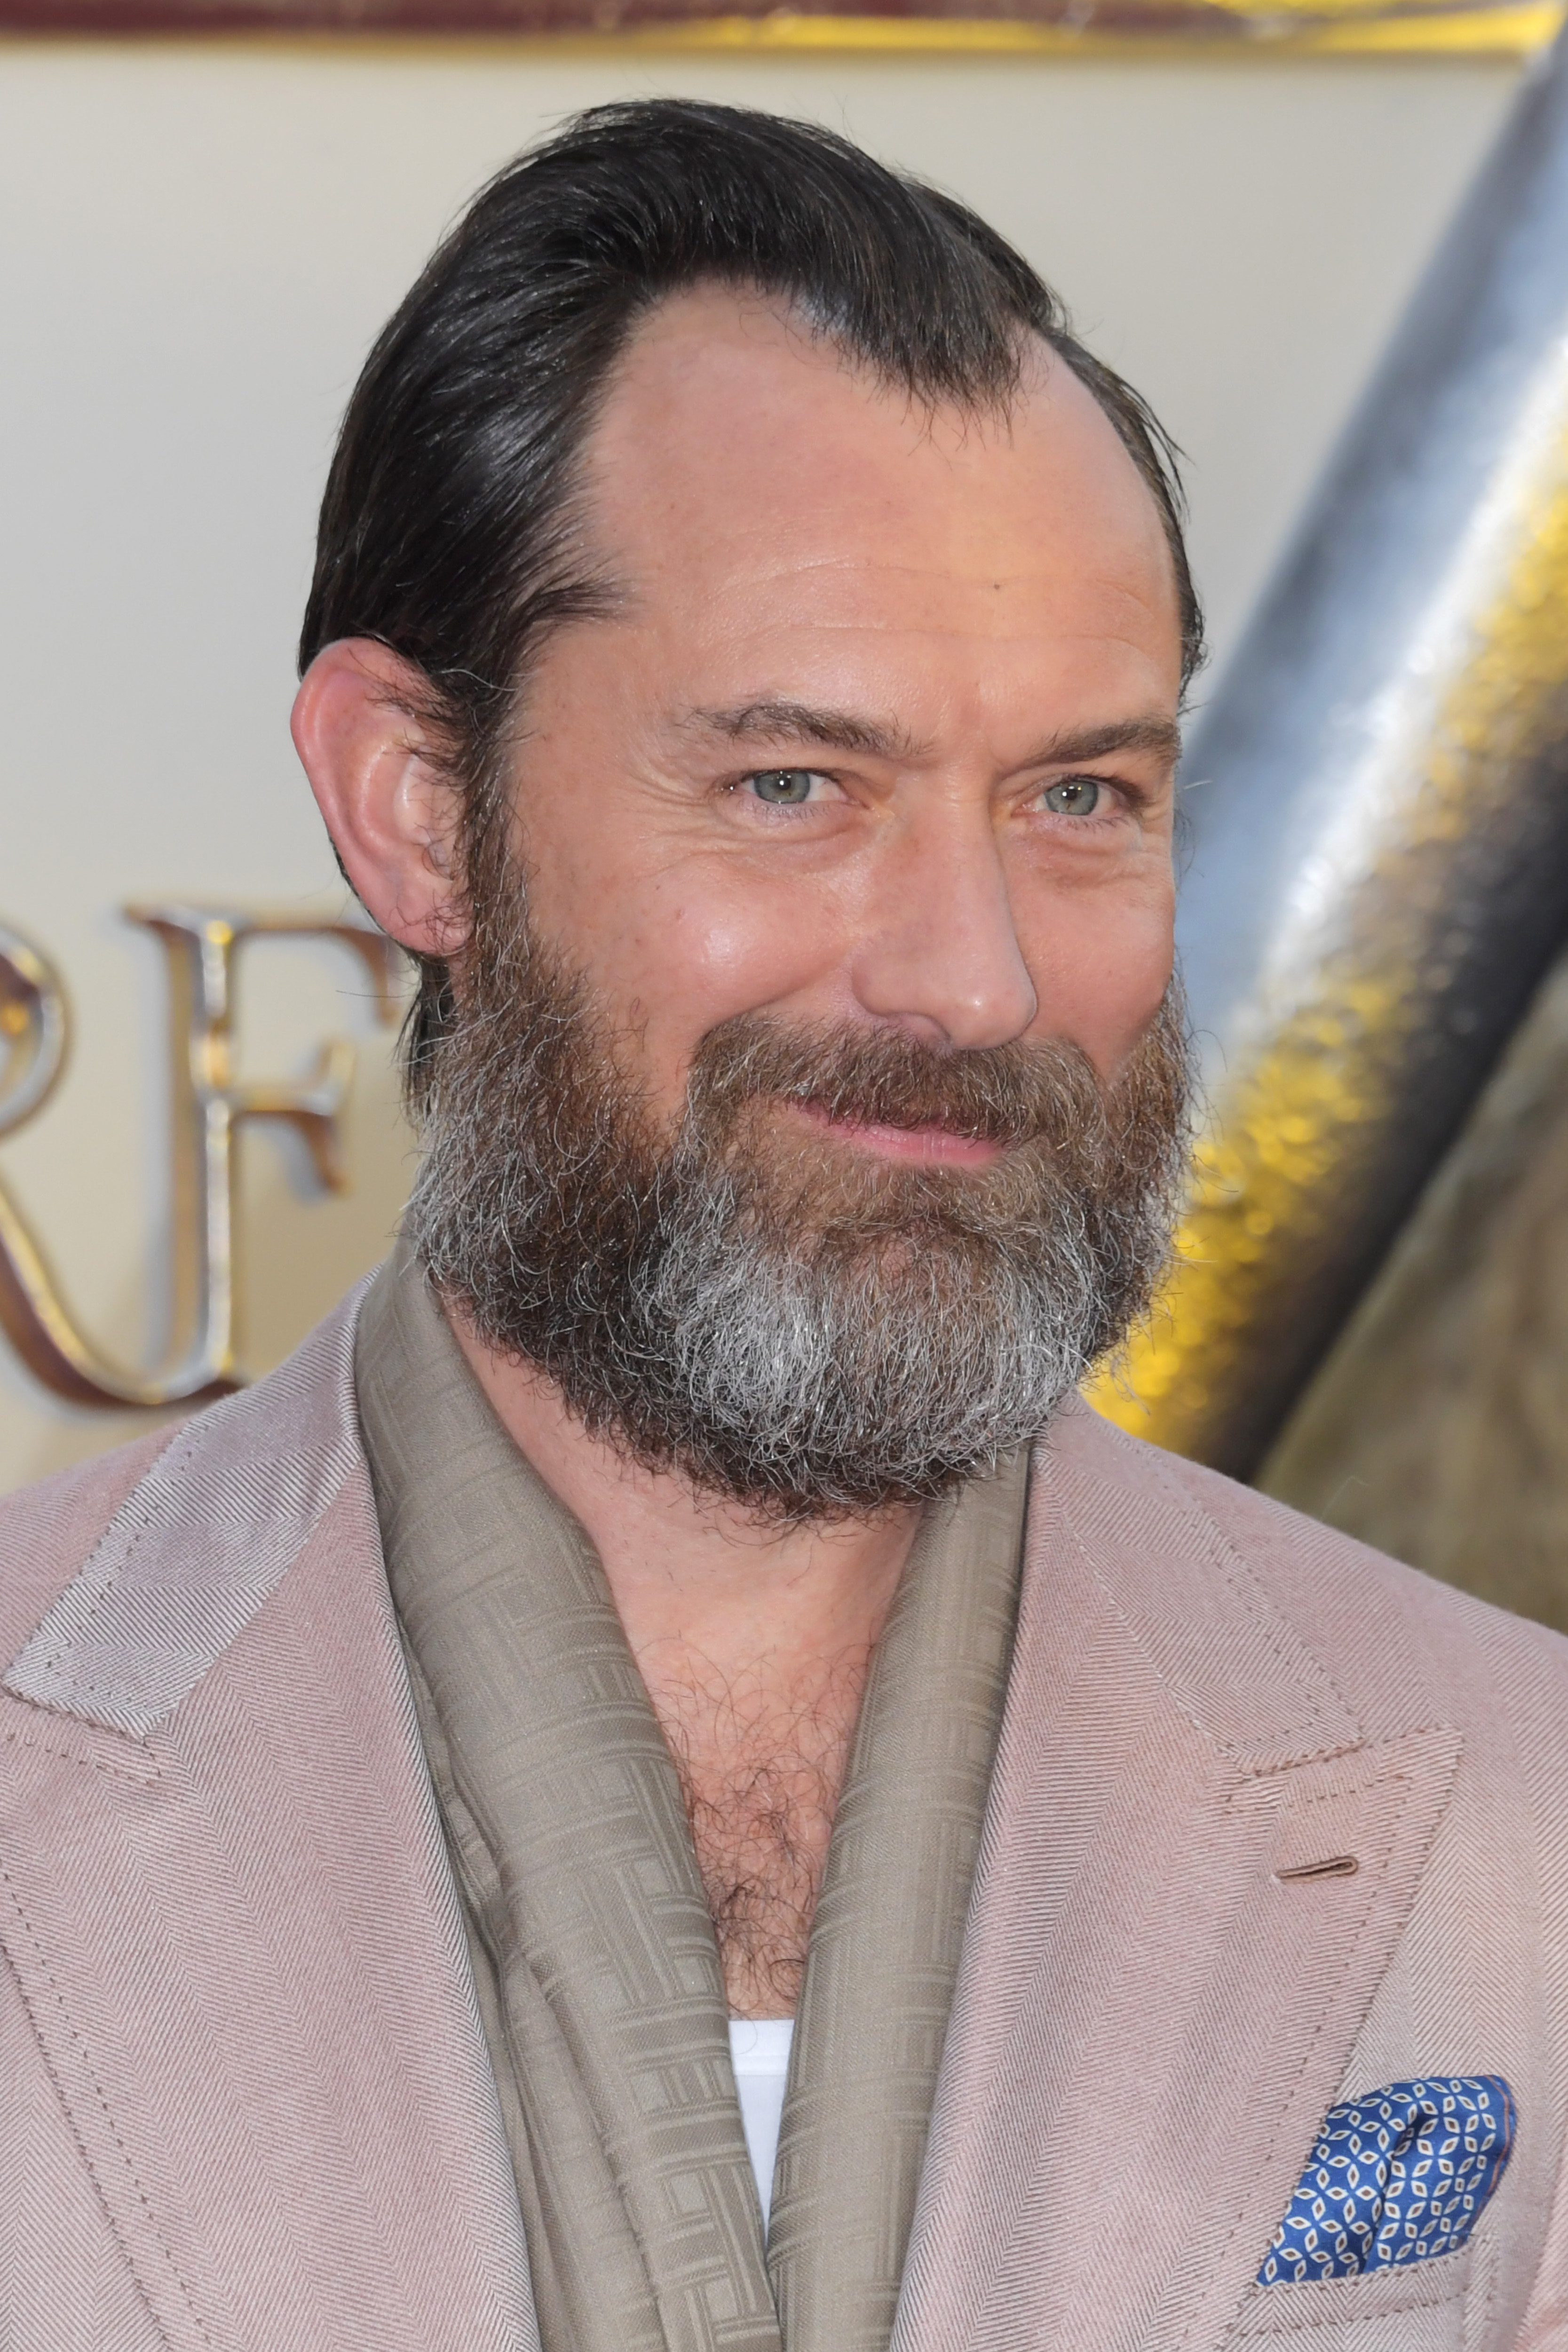 Jude Law at the world premiere of "Fantastic Beasts: The Secrets Of Dumbledore" on March 29, 2022, in London, England. | Source: Getty Images